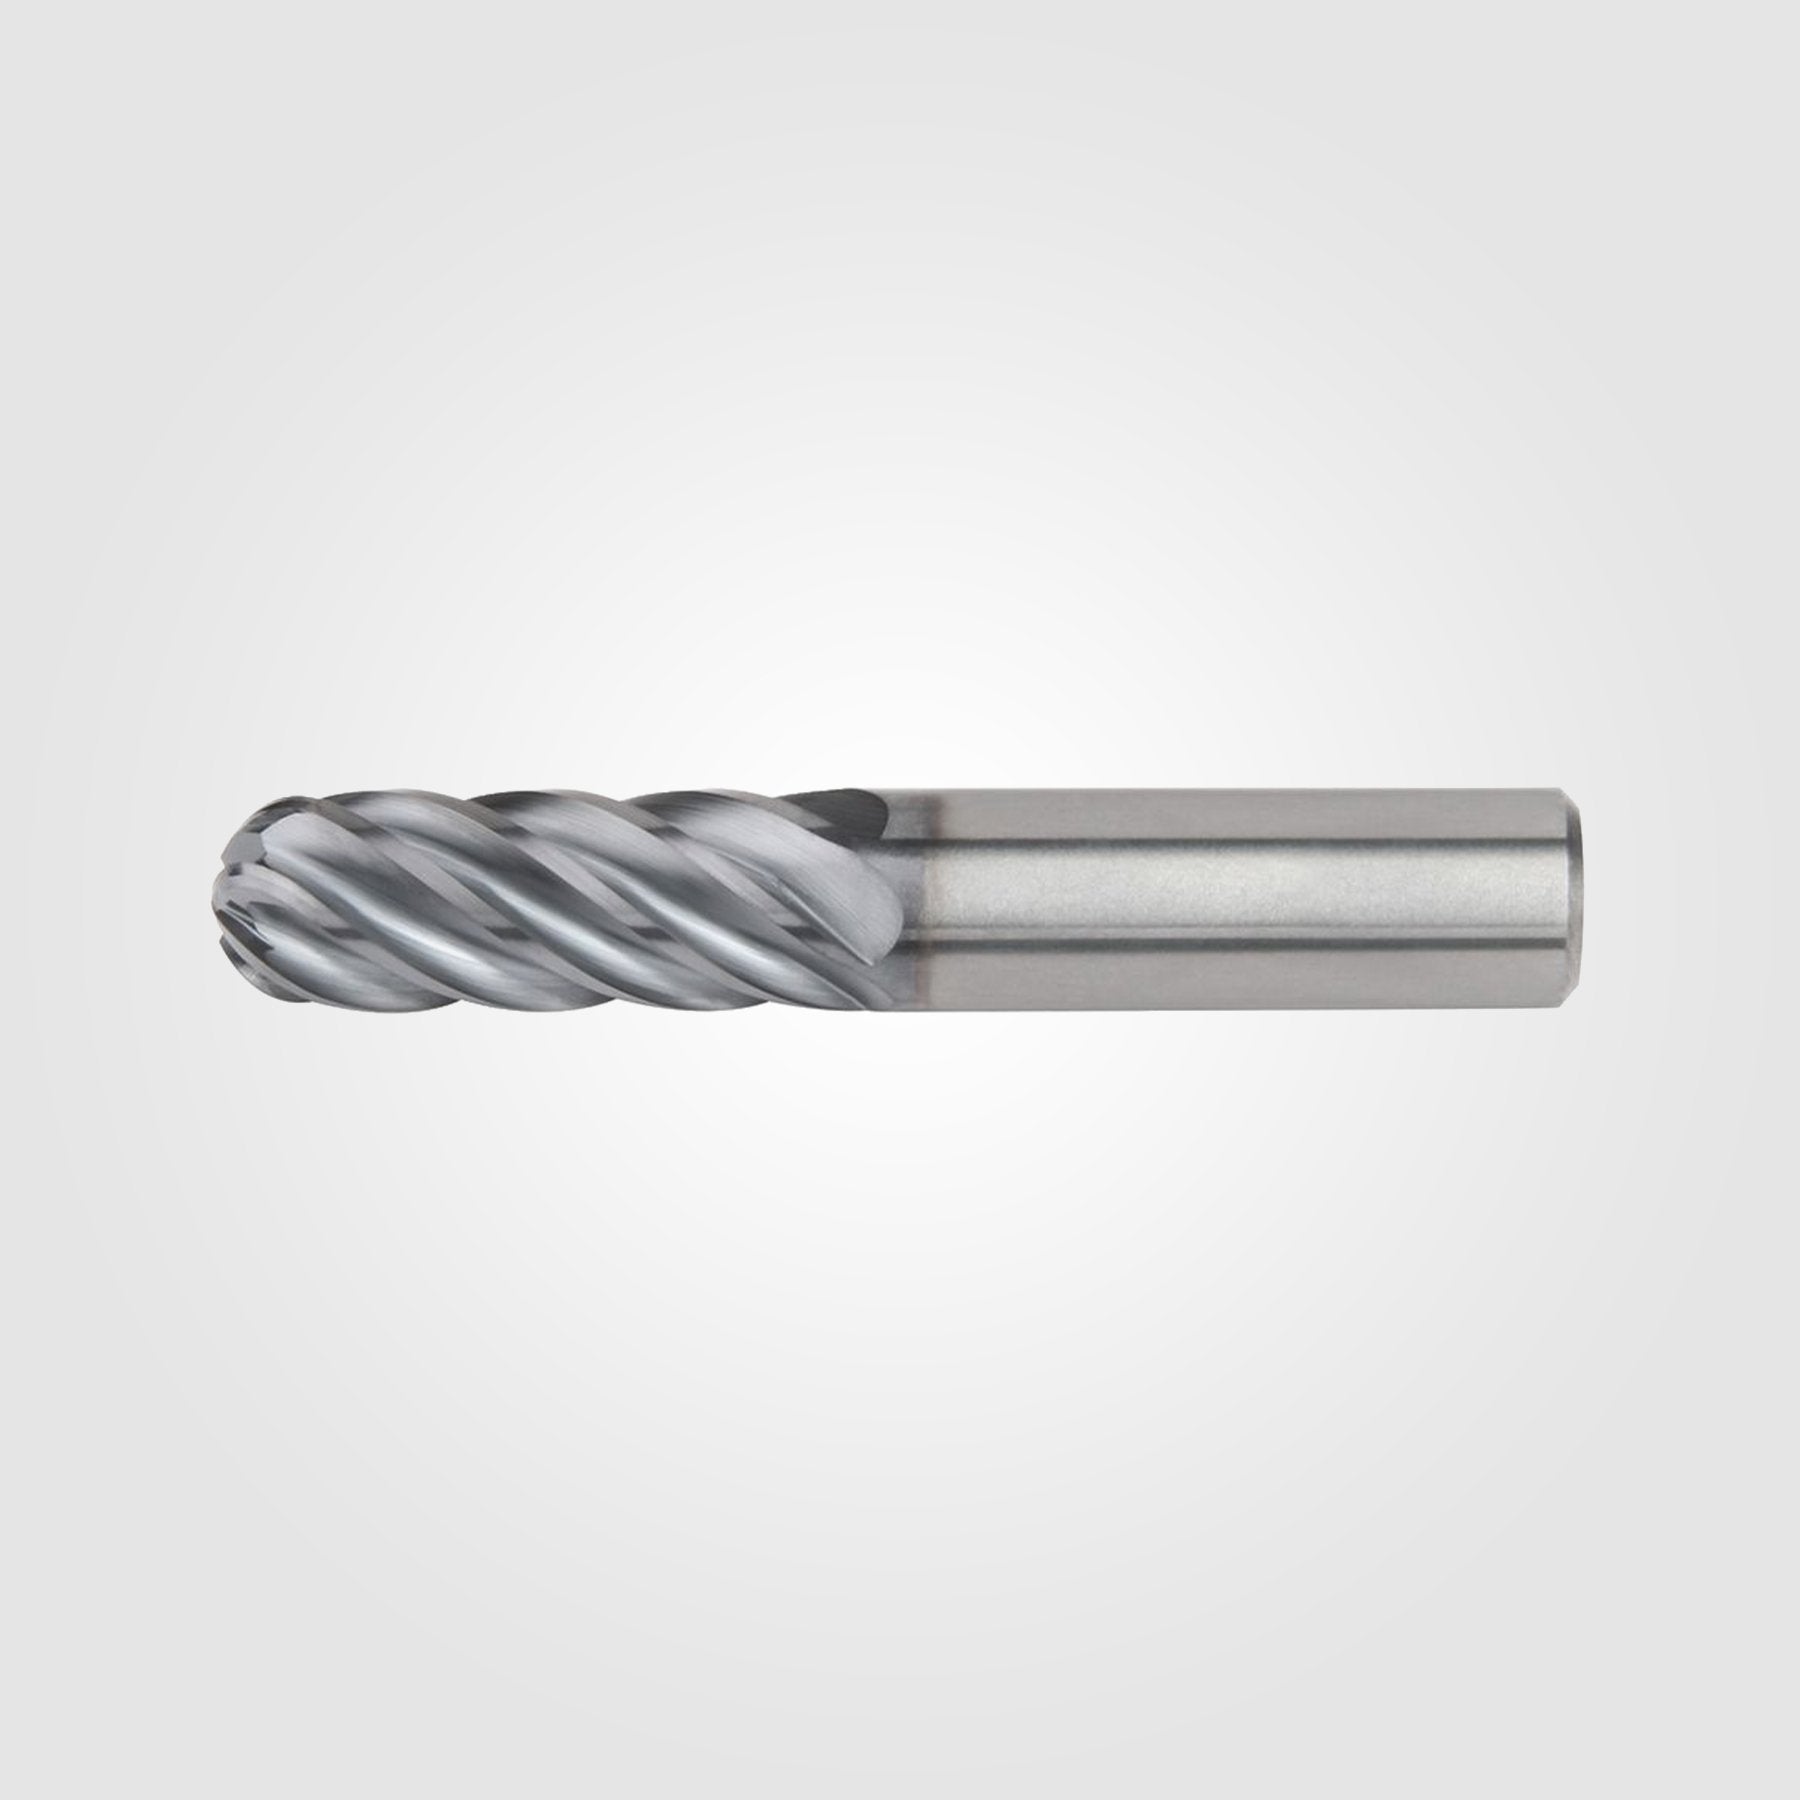 HARVI III (BALL NOSE AEROSPACE EXPANSION) | 1/2" x 1/2" x 2 1/2" x 4 1/2" | 6 FLUTE SOLID CARBIDE ENDMILL | 6113152